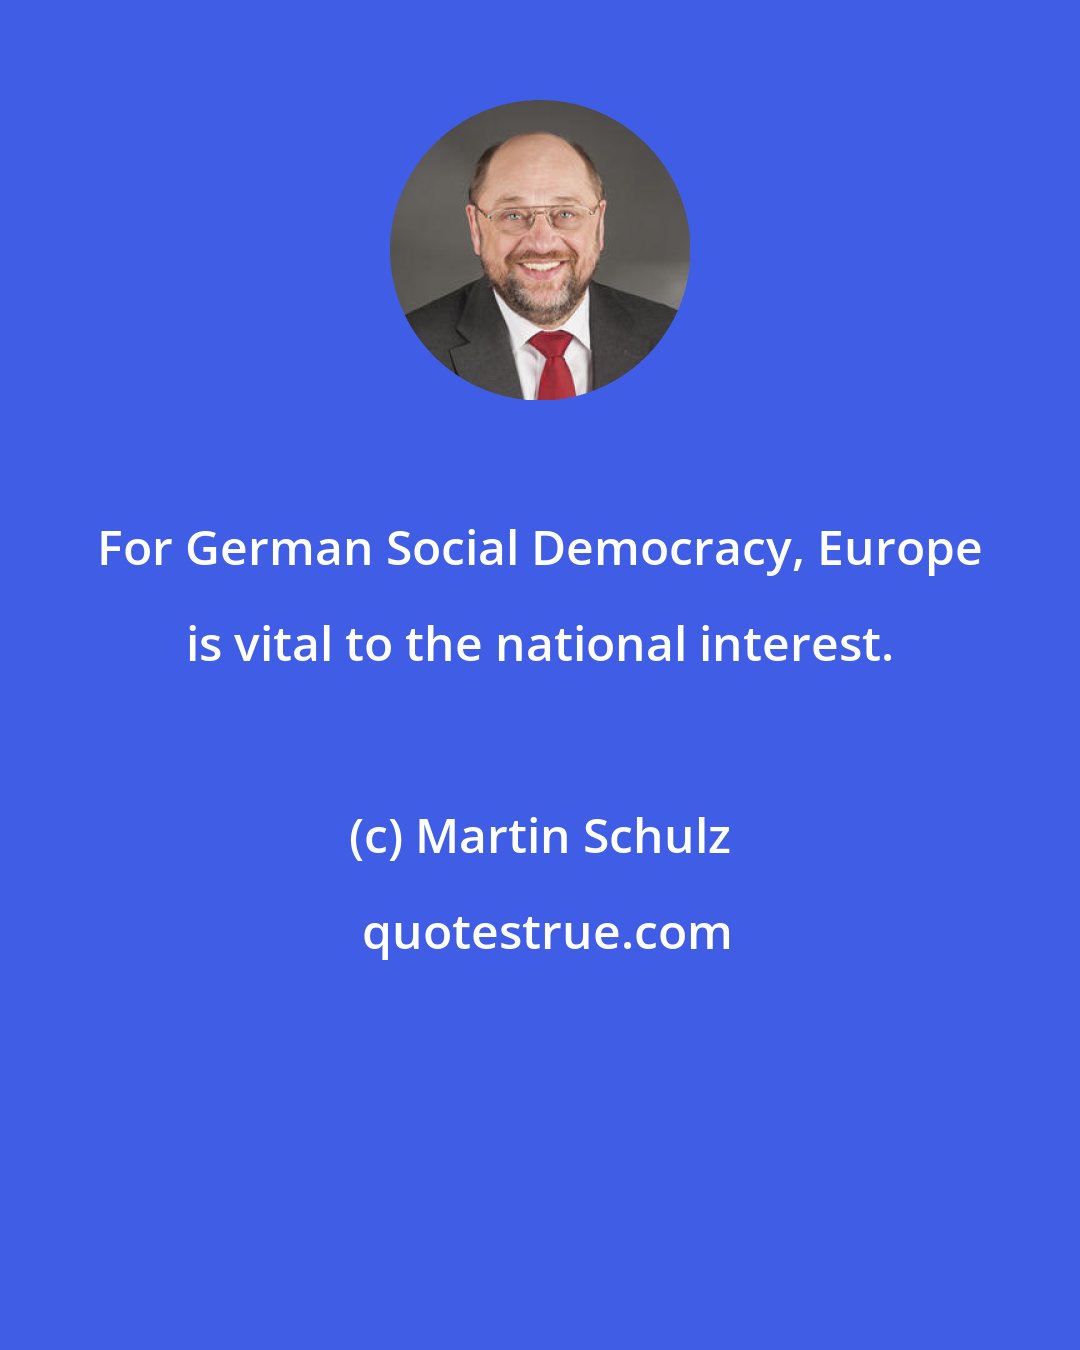 Martin Schulz: For German Social Democracy, Europe is vital to the national interest.